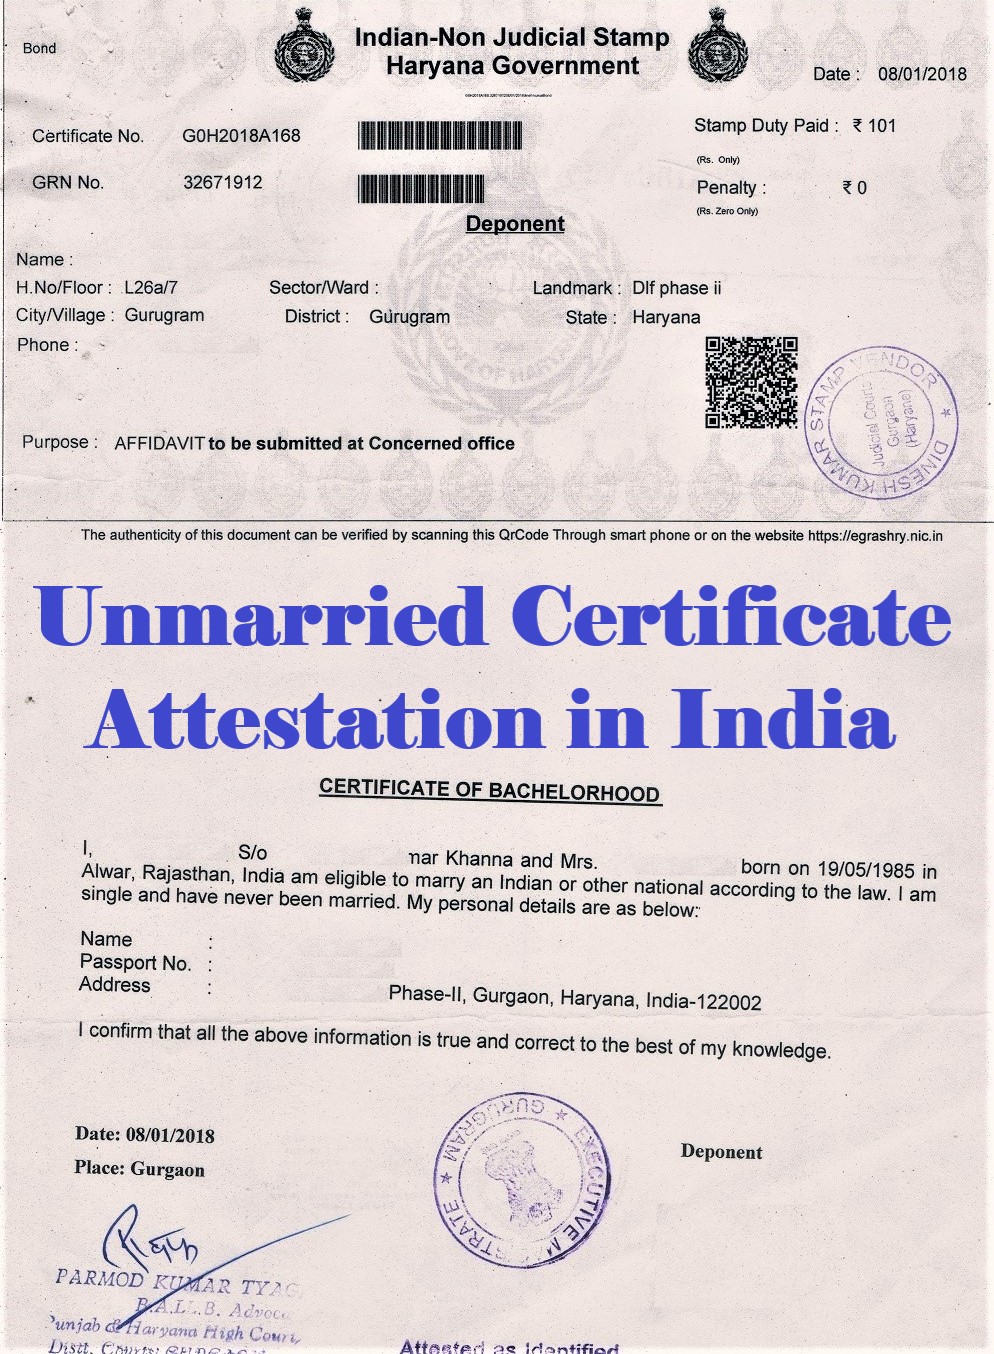 Unmarried Certificate Attestation from Afghanistan Embassy